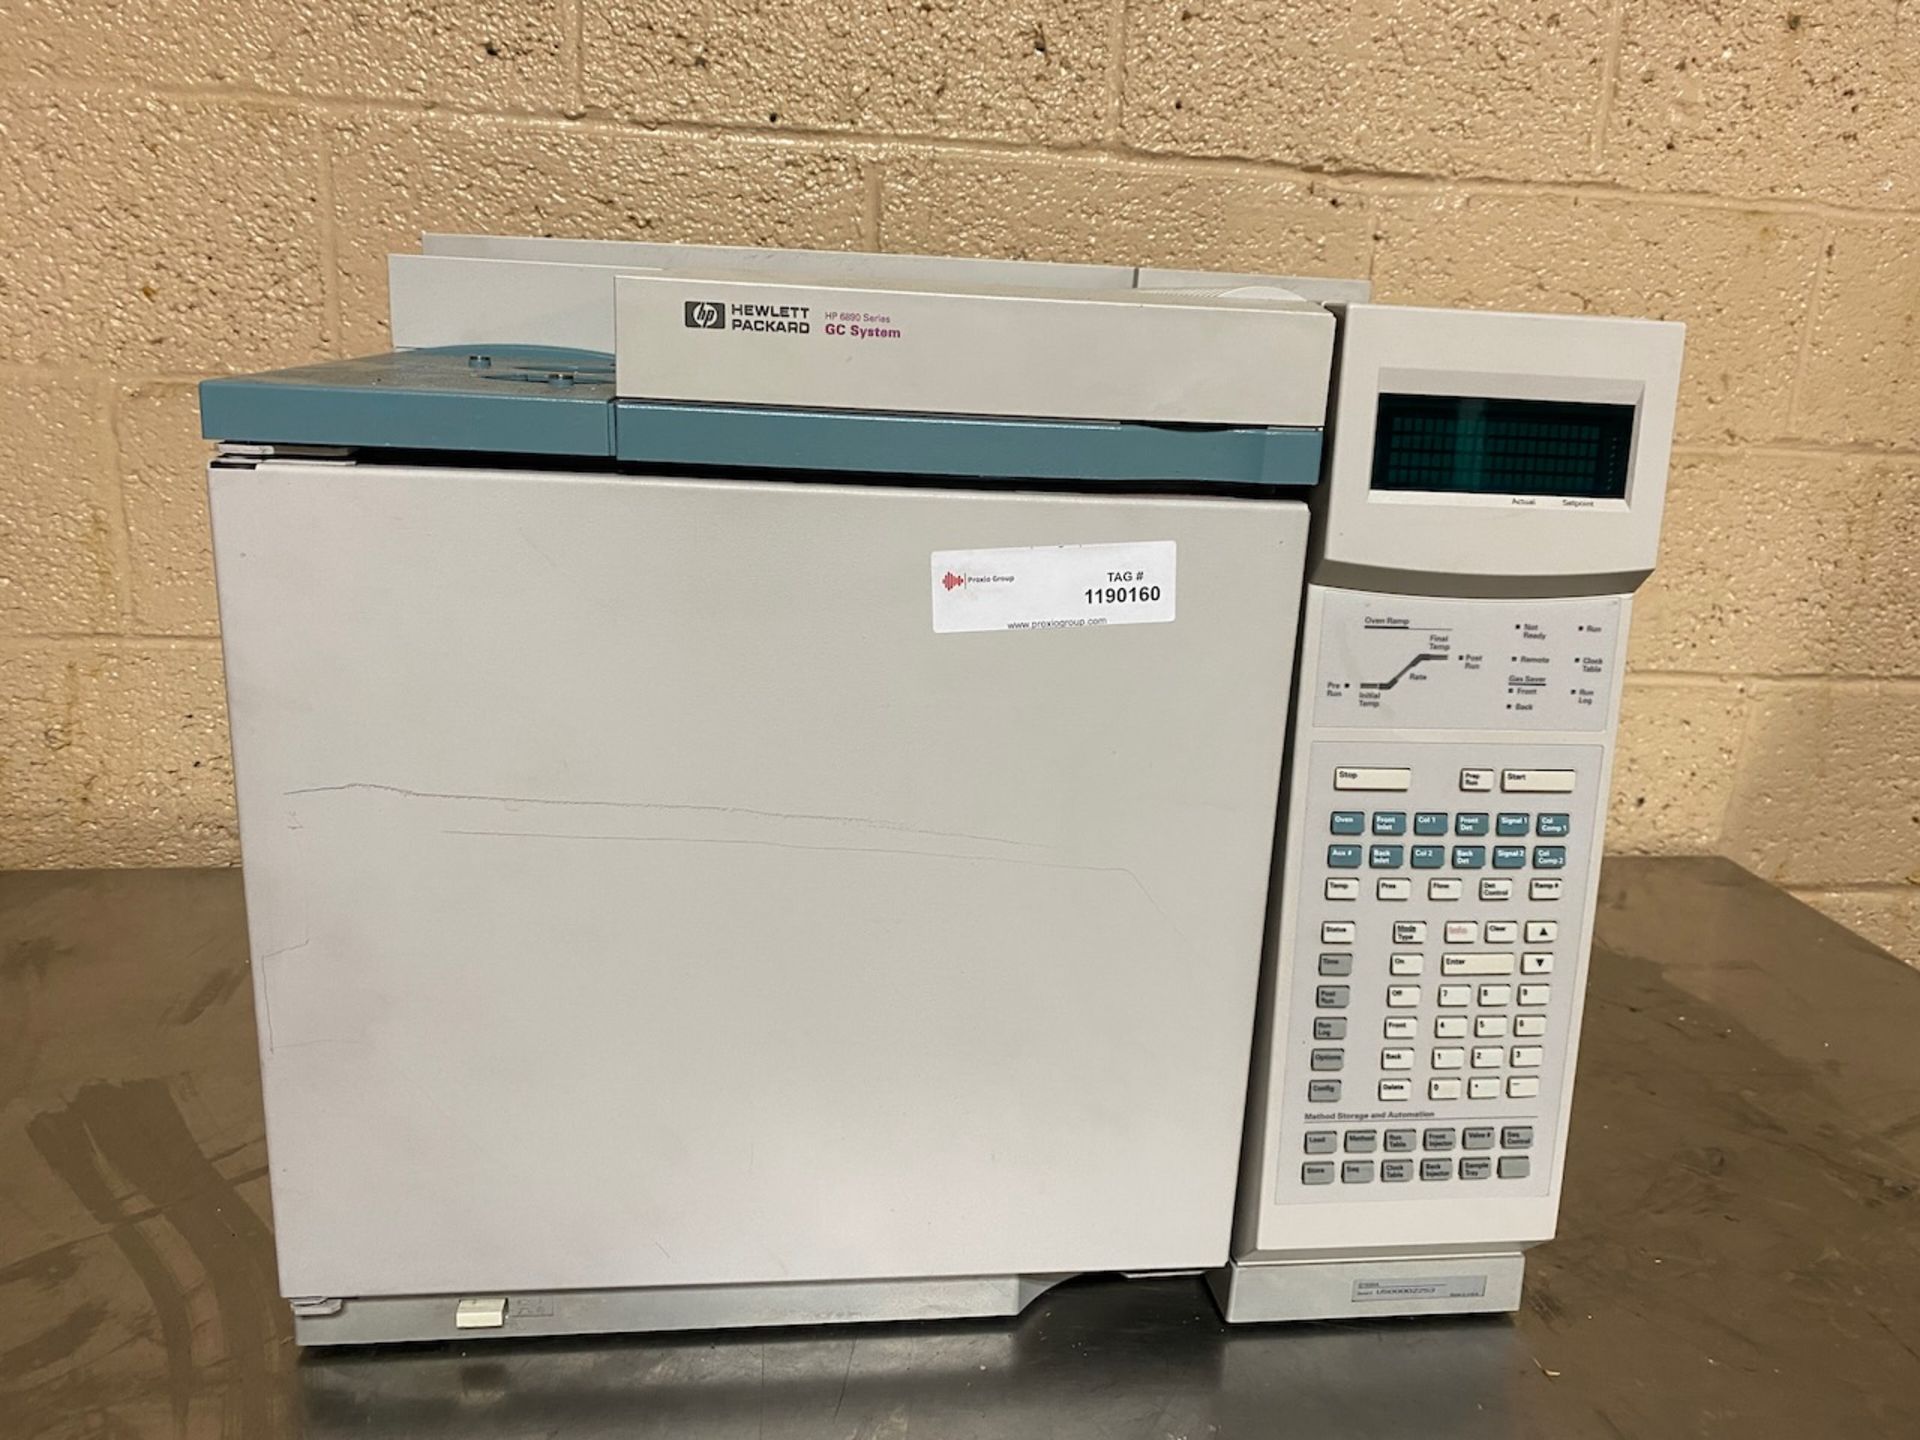 Hewlett Packard G1530A Gas Chromatograph with 6890 System, S/N US00002253. {TAG:1190160}